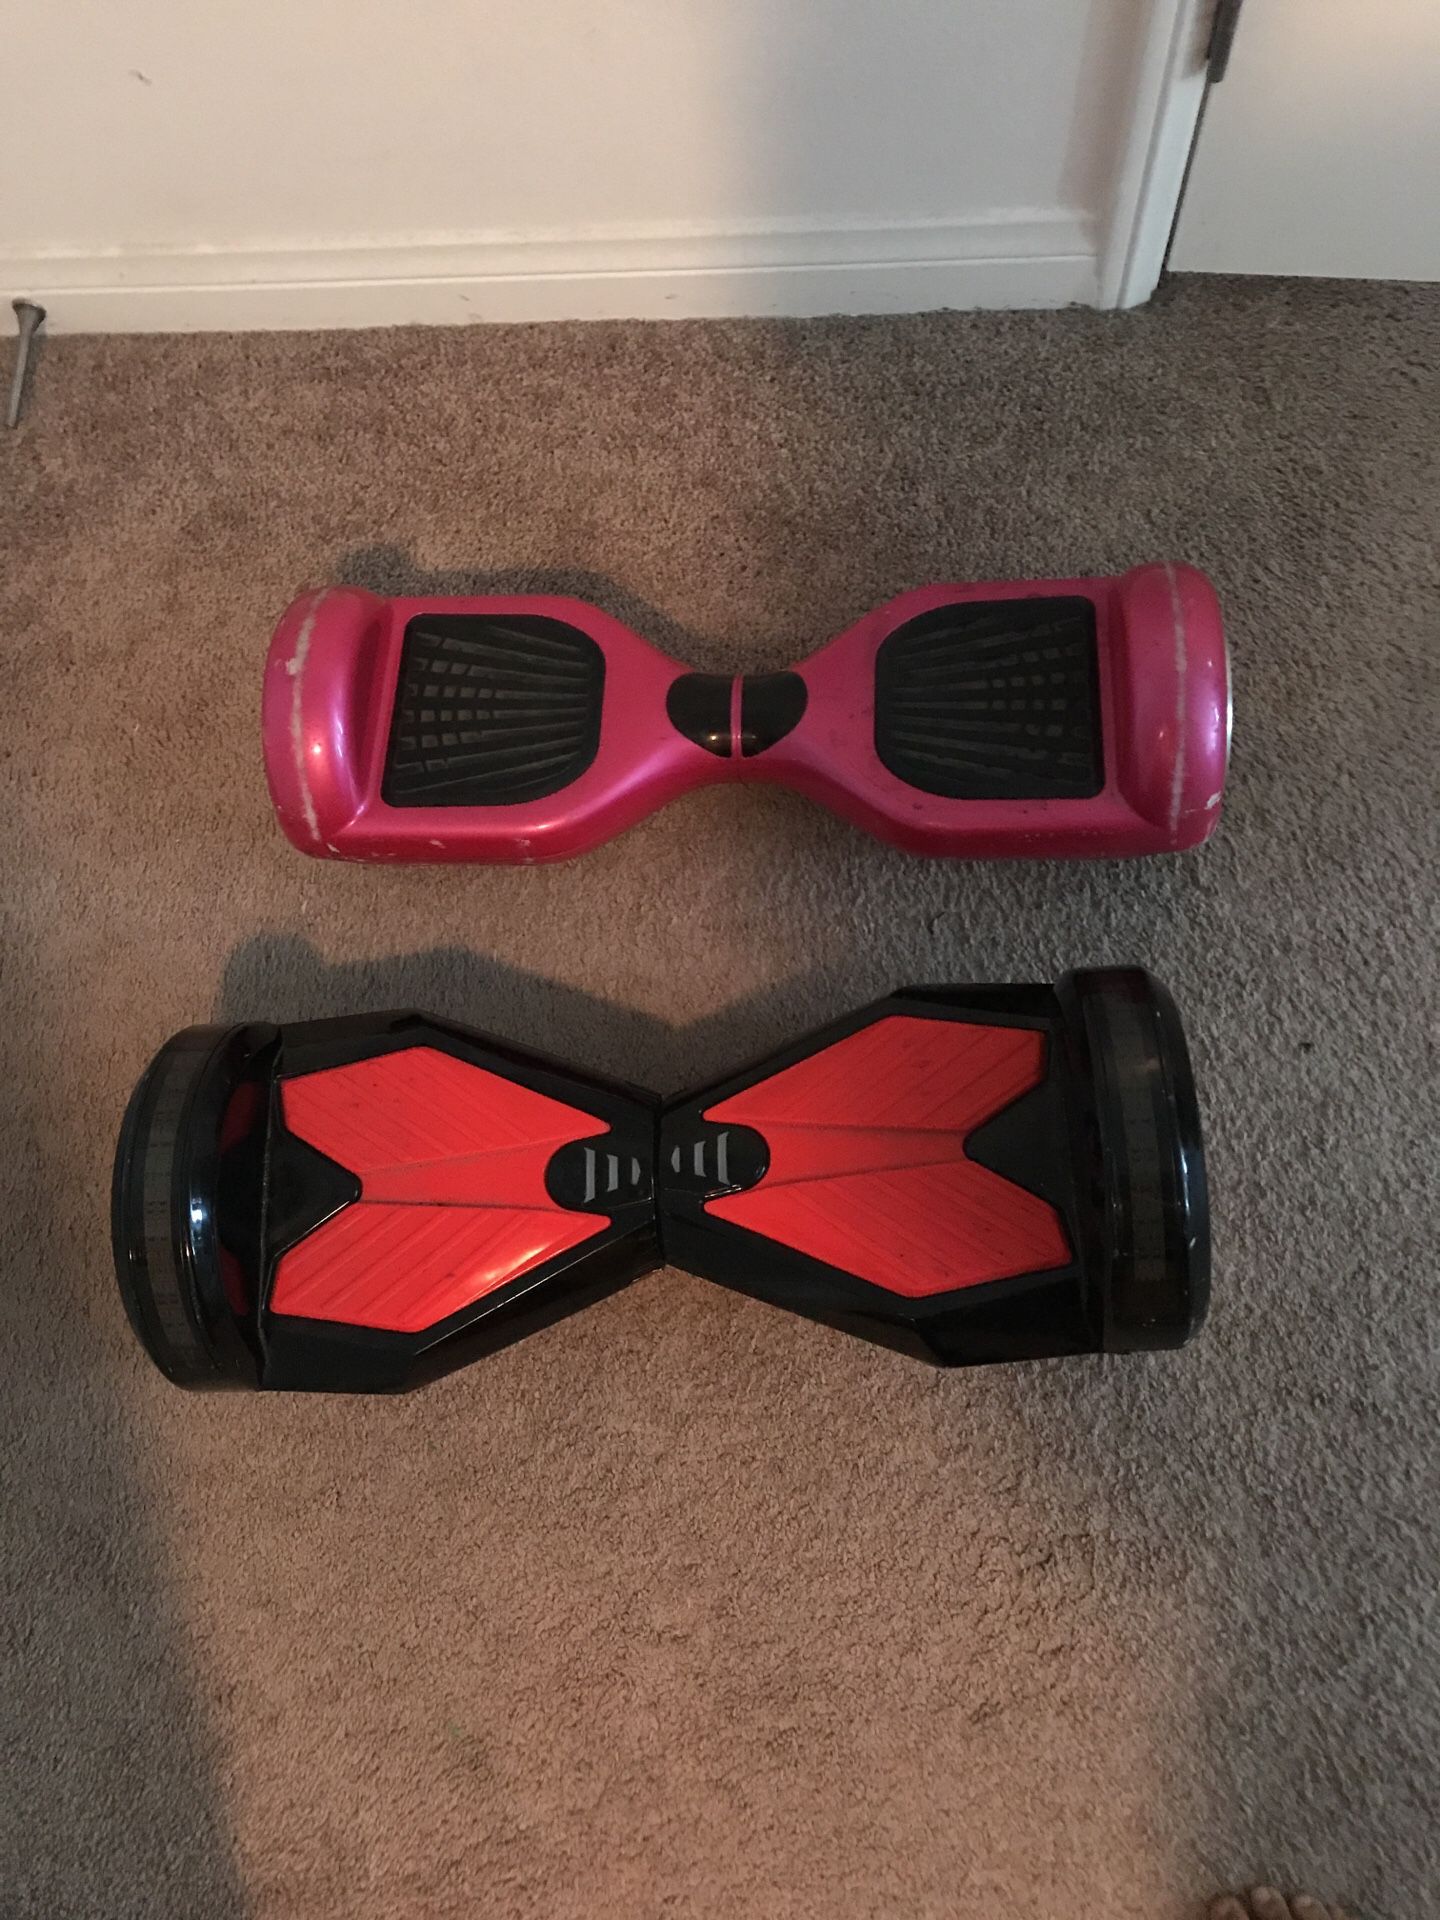 TWO LOW PRICE HOVERBOARDS WITH CHANGER !